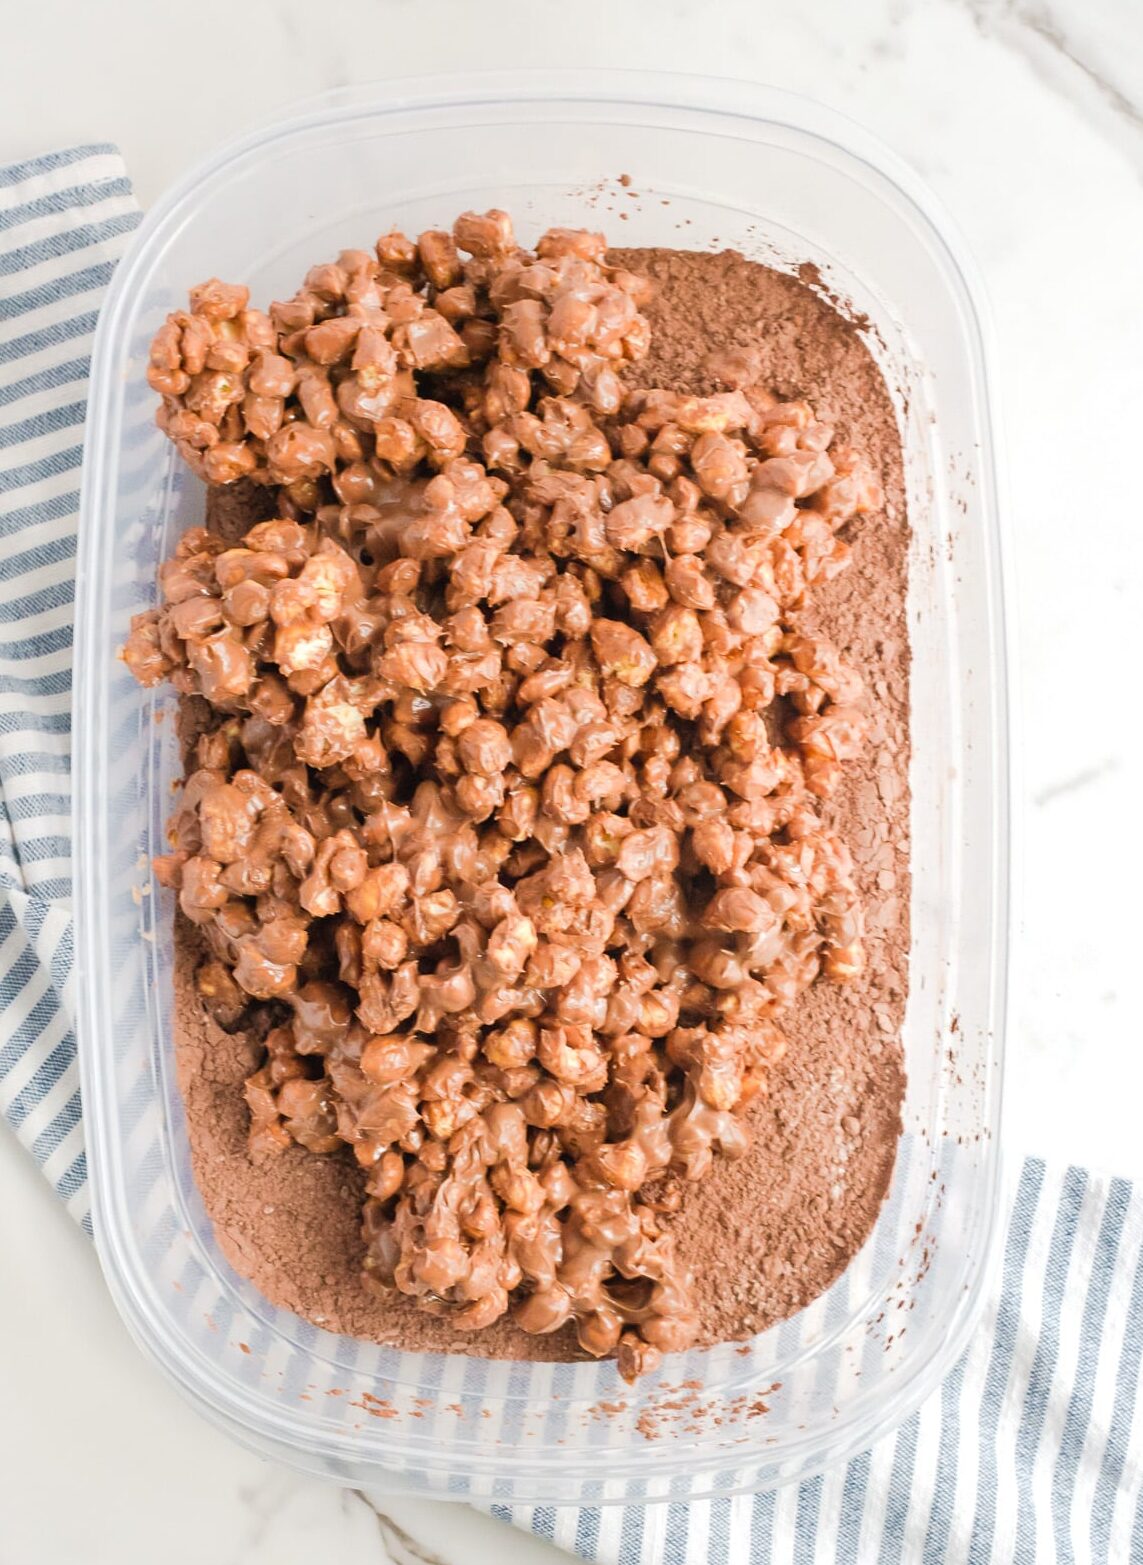 A large plastic container filled with chocolate covered Corn Pops on top of cocoa powder.